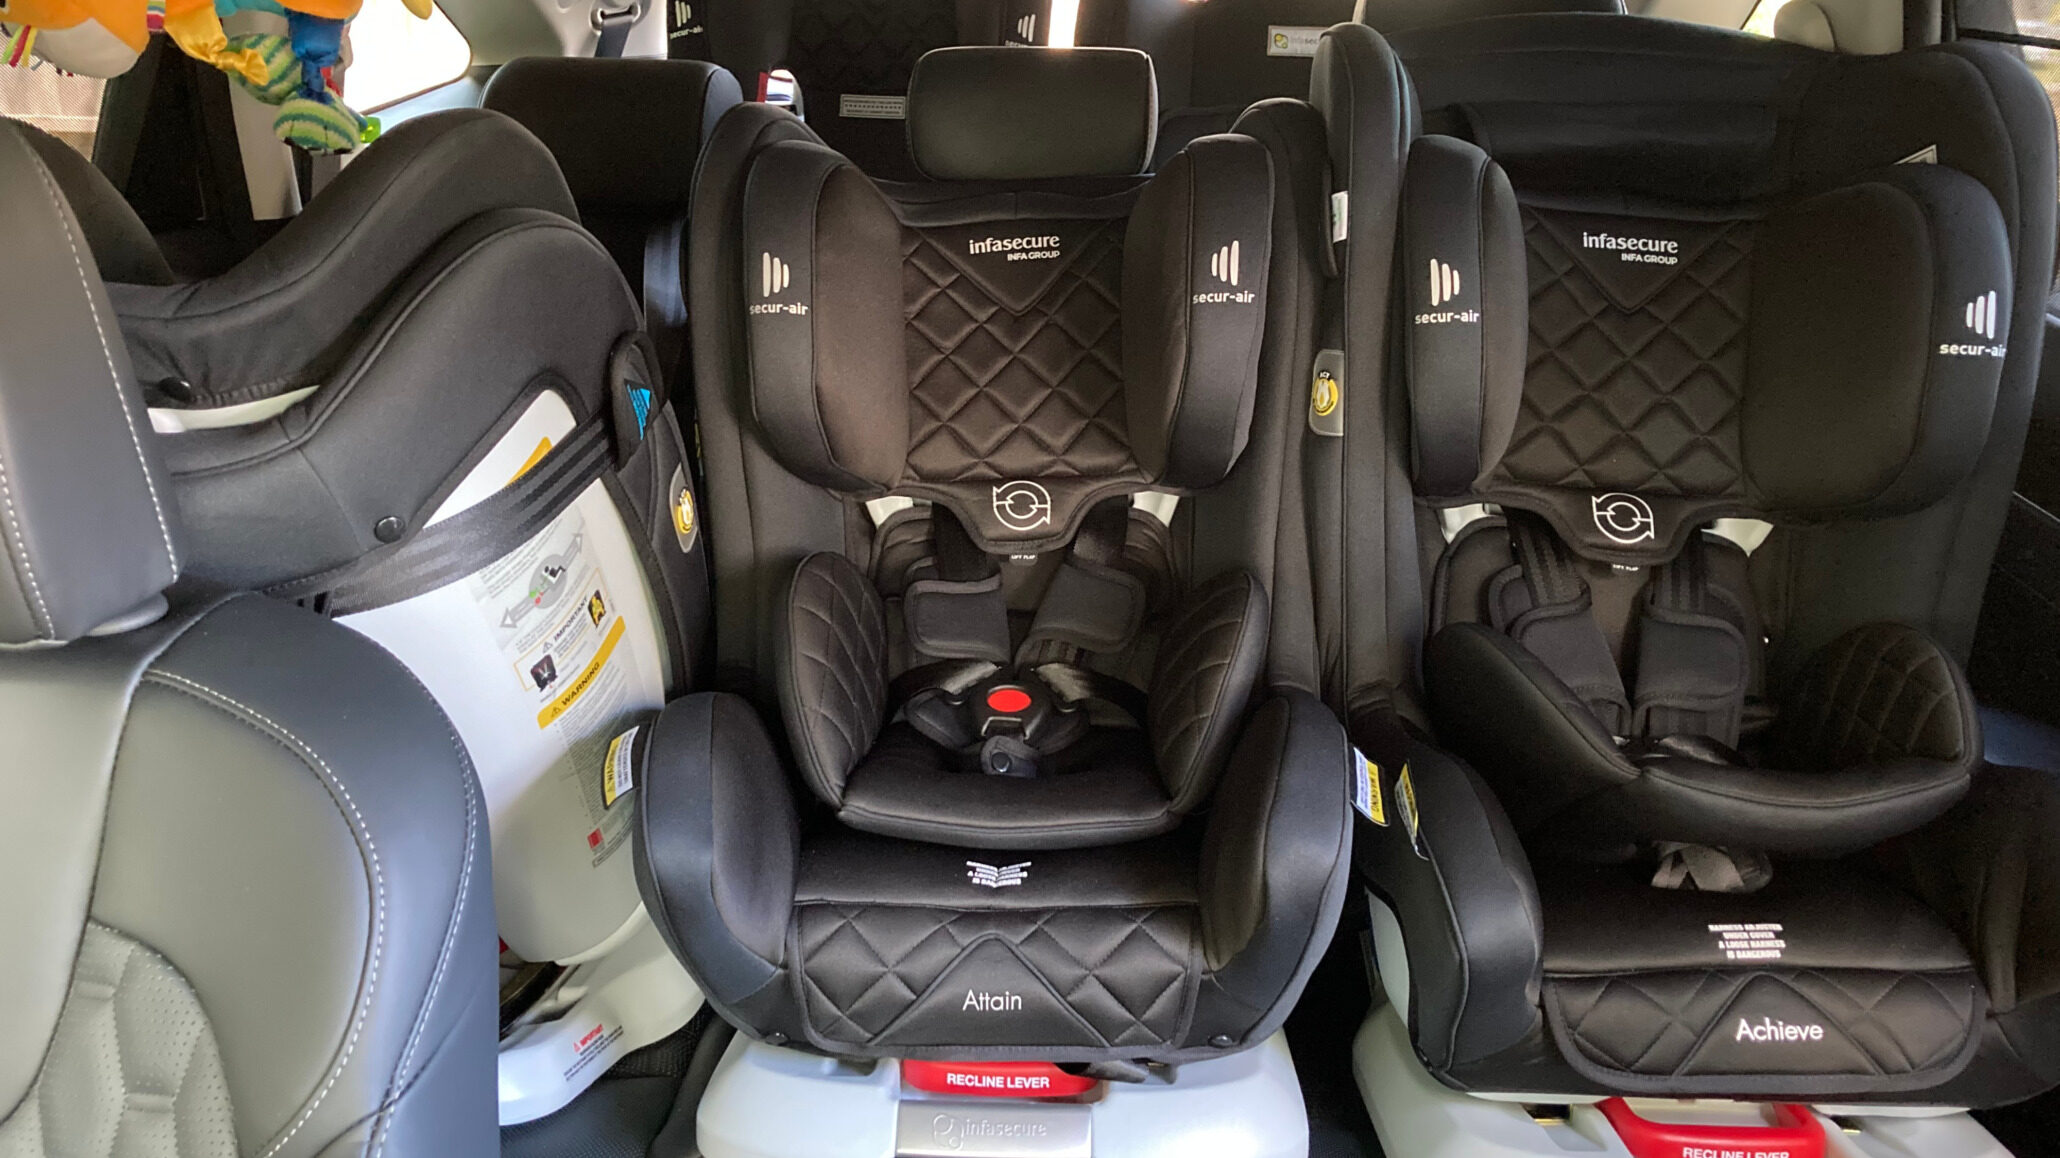 Which 7 seaters will fit 4 child seats? – BabyDrive